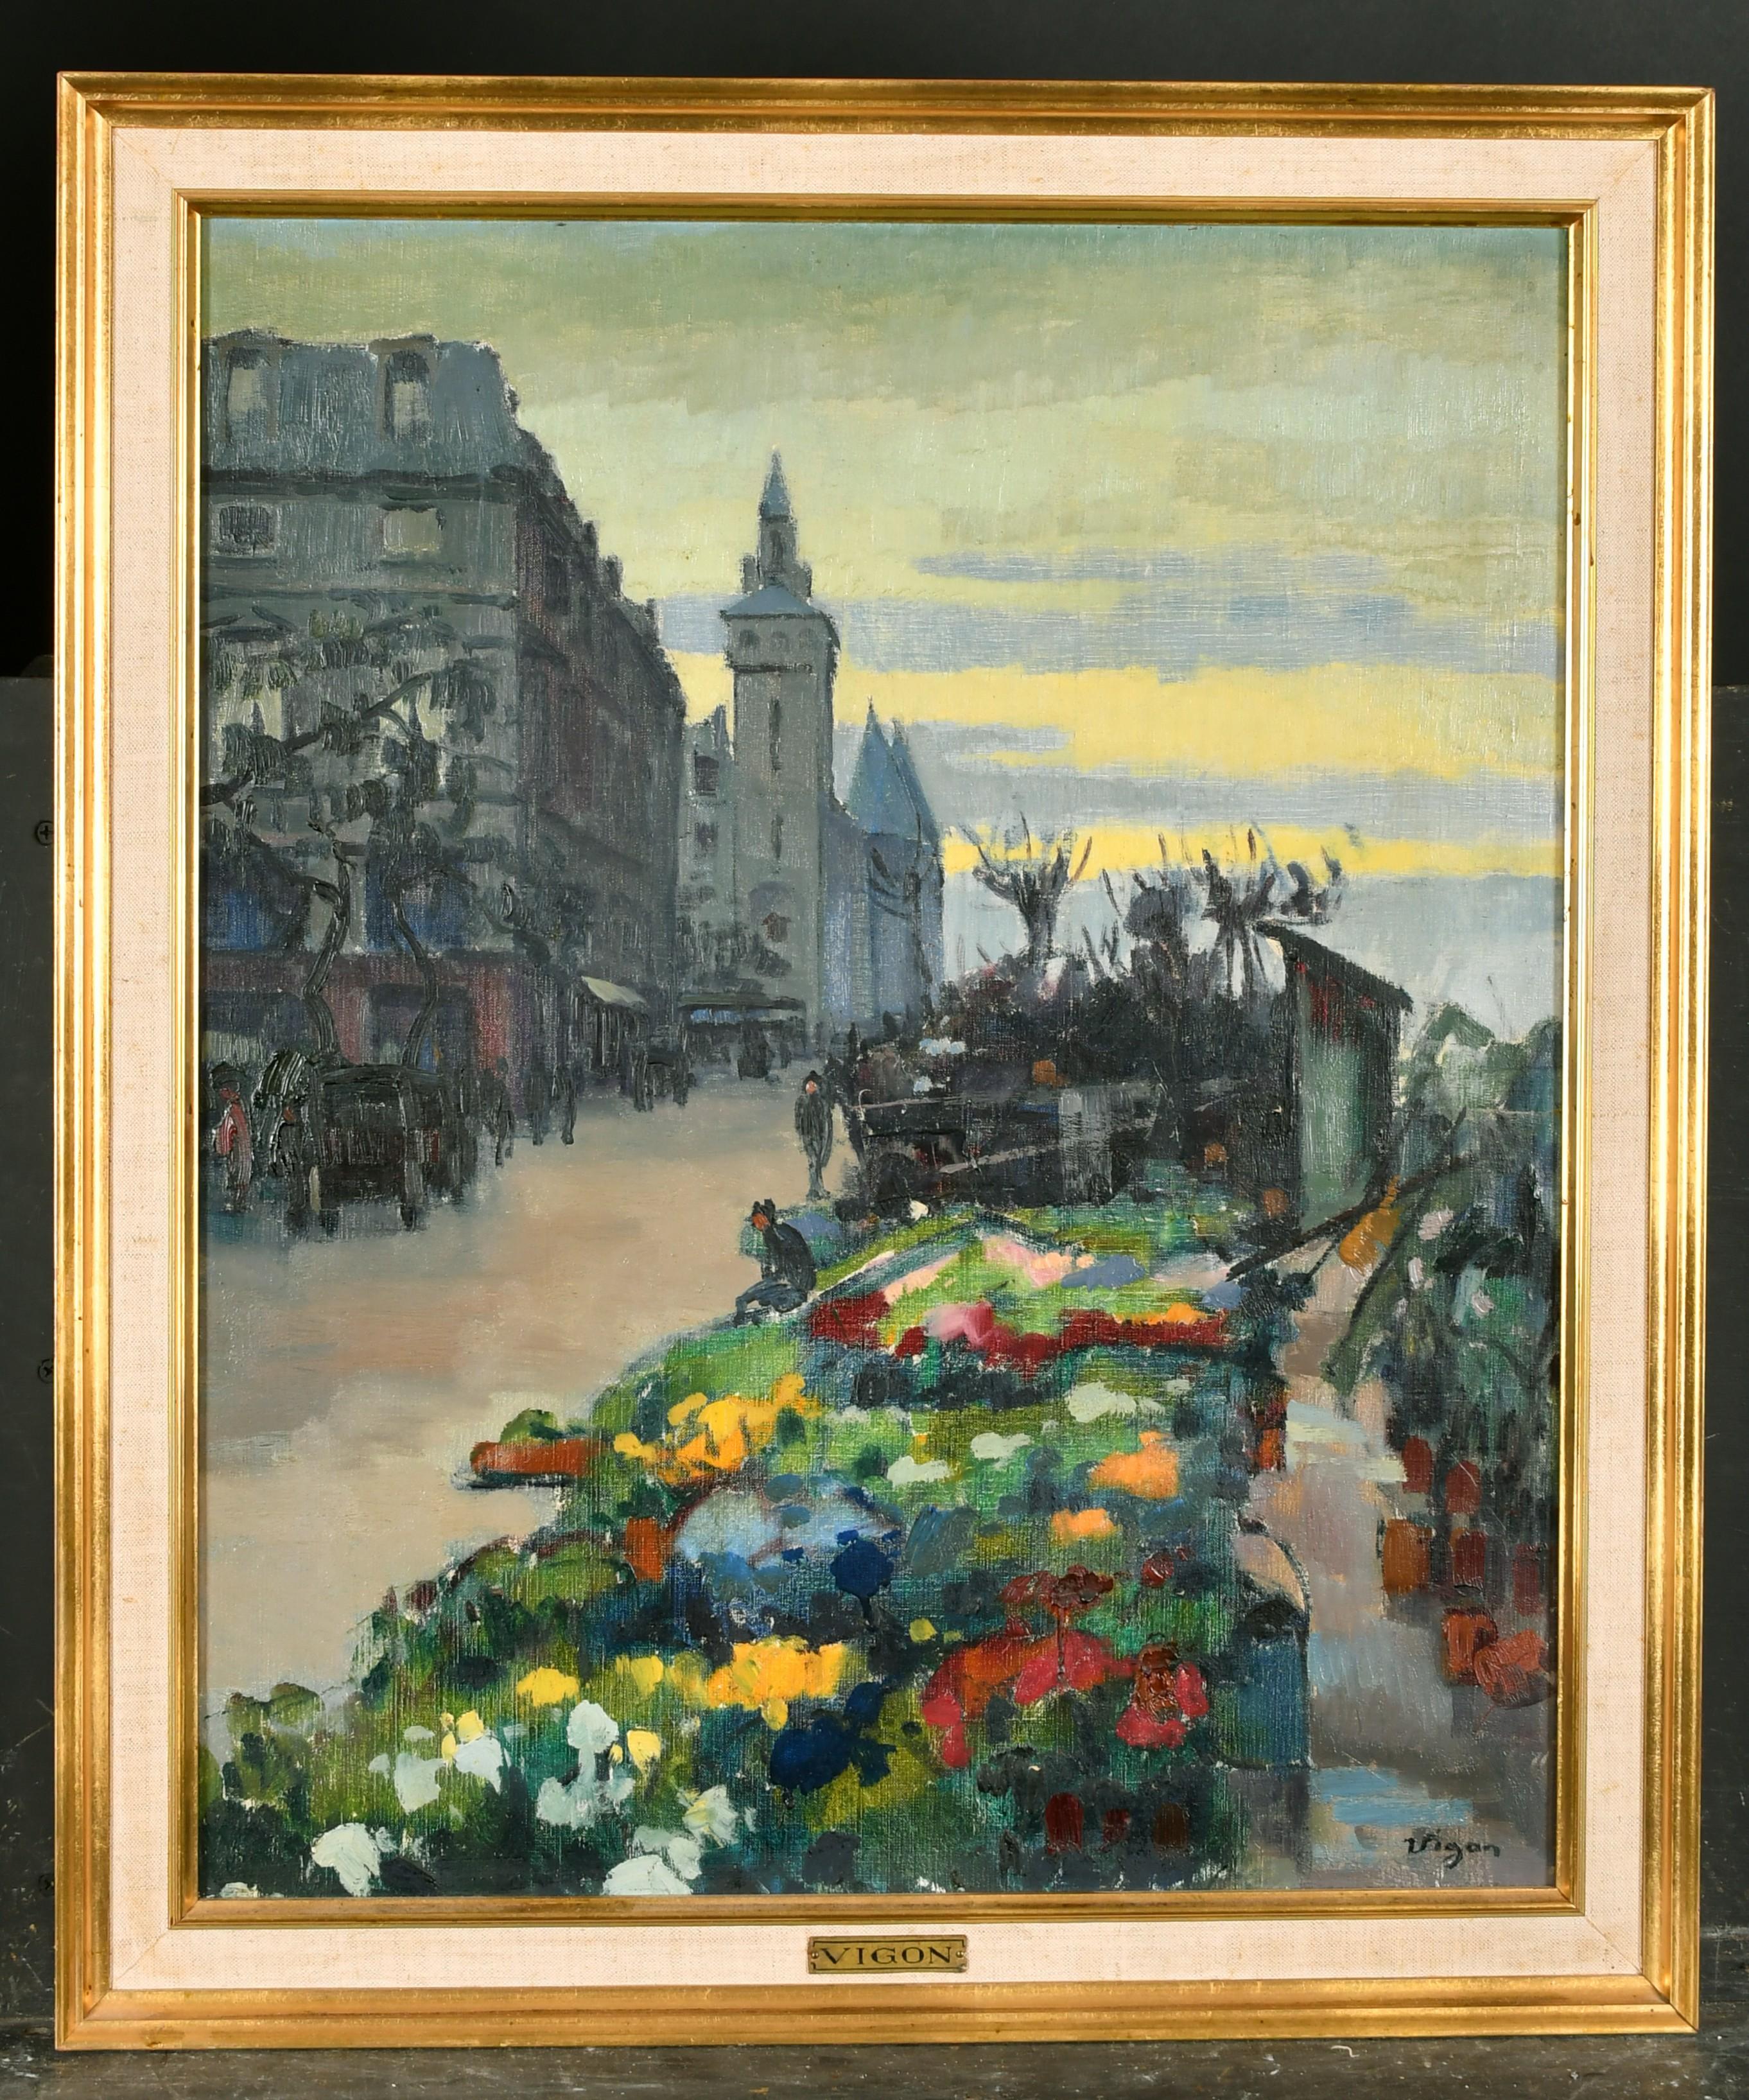 Vigon ( 20th Century) Figurative Painting - The Parisian Flower Market at Sunset, Signed French Impressionist Oil